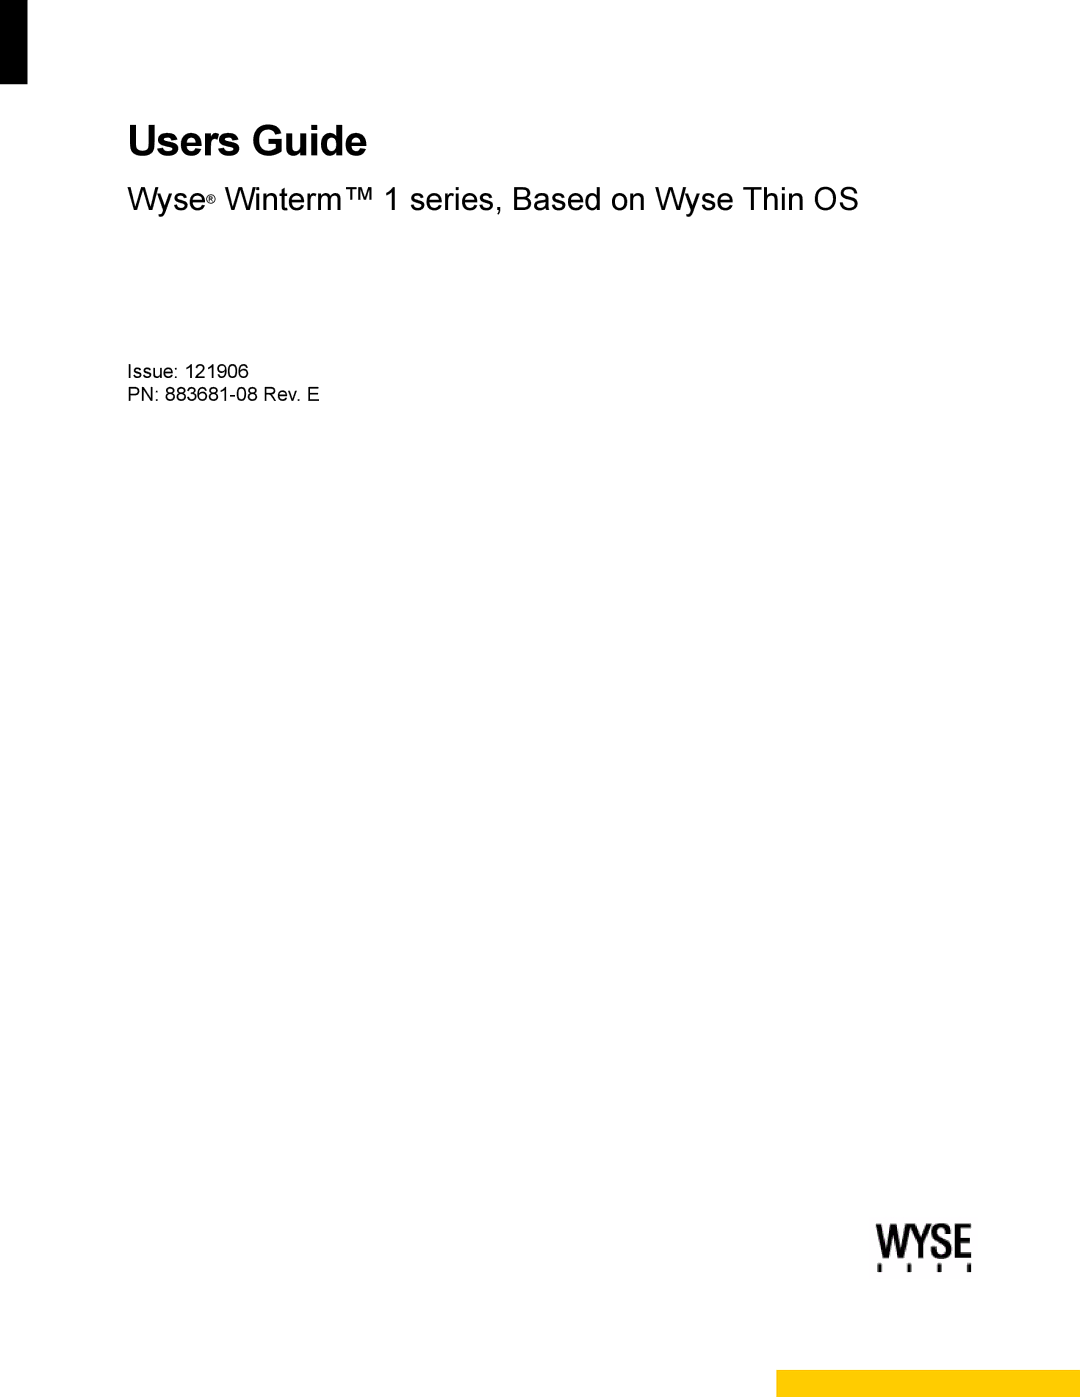 Wyse Technology 883681-08 Rev. E manual Users Guide, Wyse Winterm 1 series, Based on Wyse Thin OS 